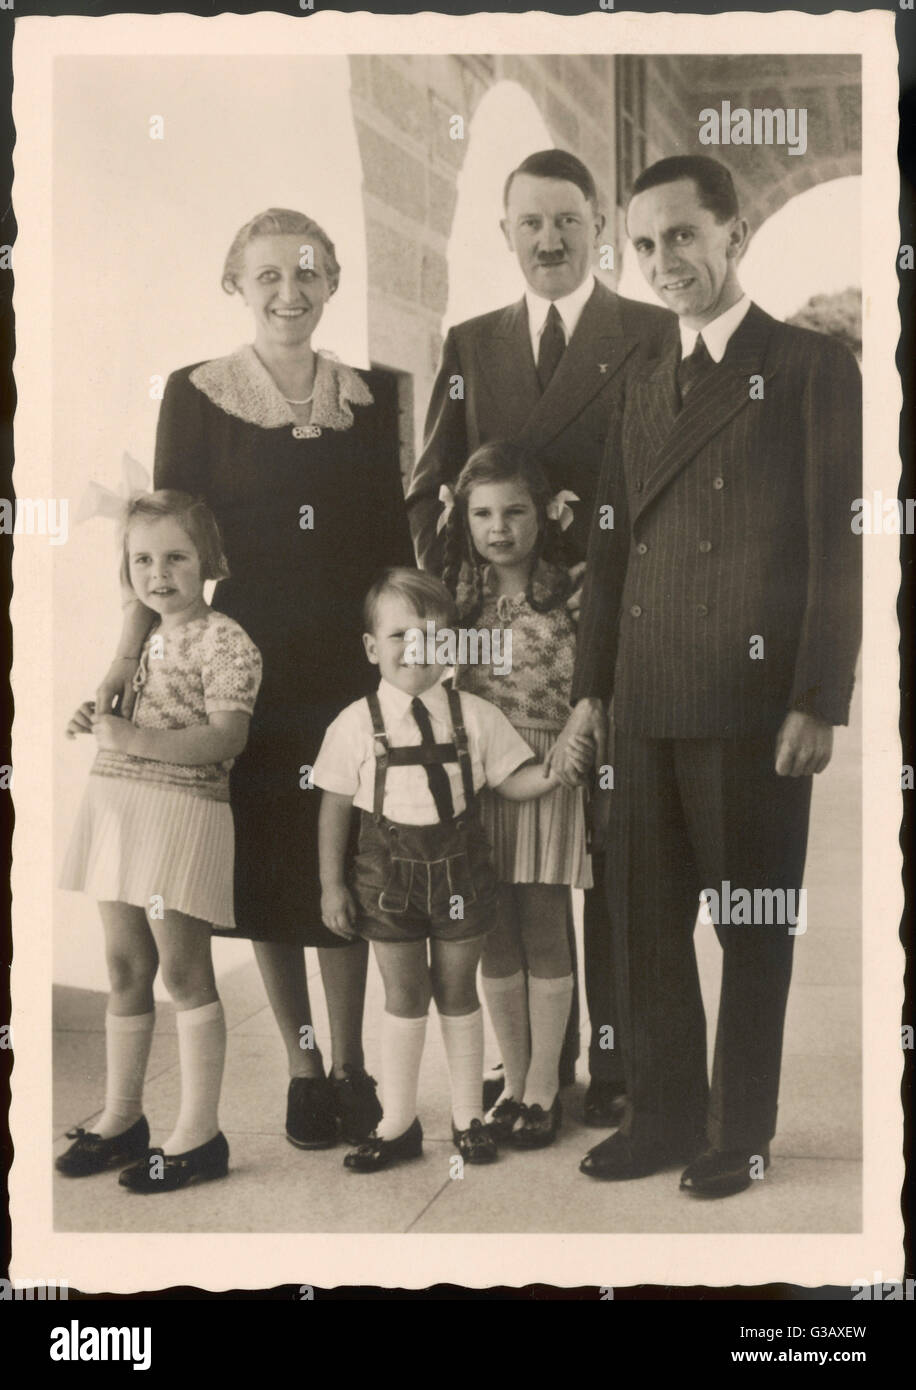 He poses with Goebbels, his  wife Magda, and three of their  children (they had three more)  all of whom died in the  Fuhrerbunker, April 1945      Date: 1930s Stock Photo